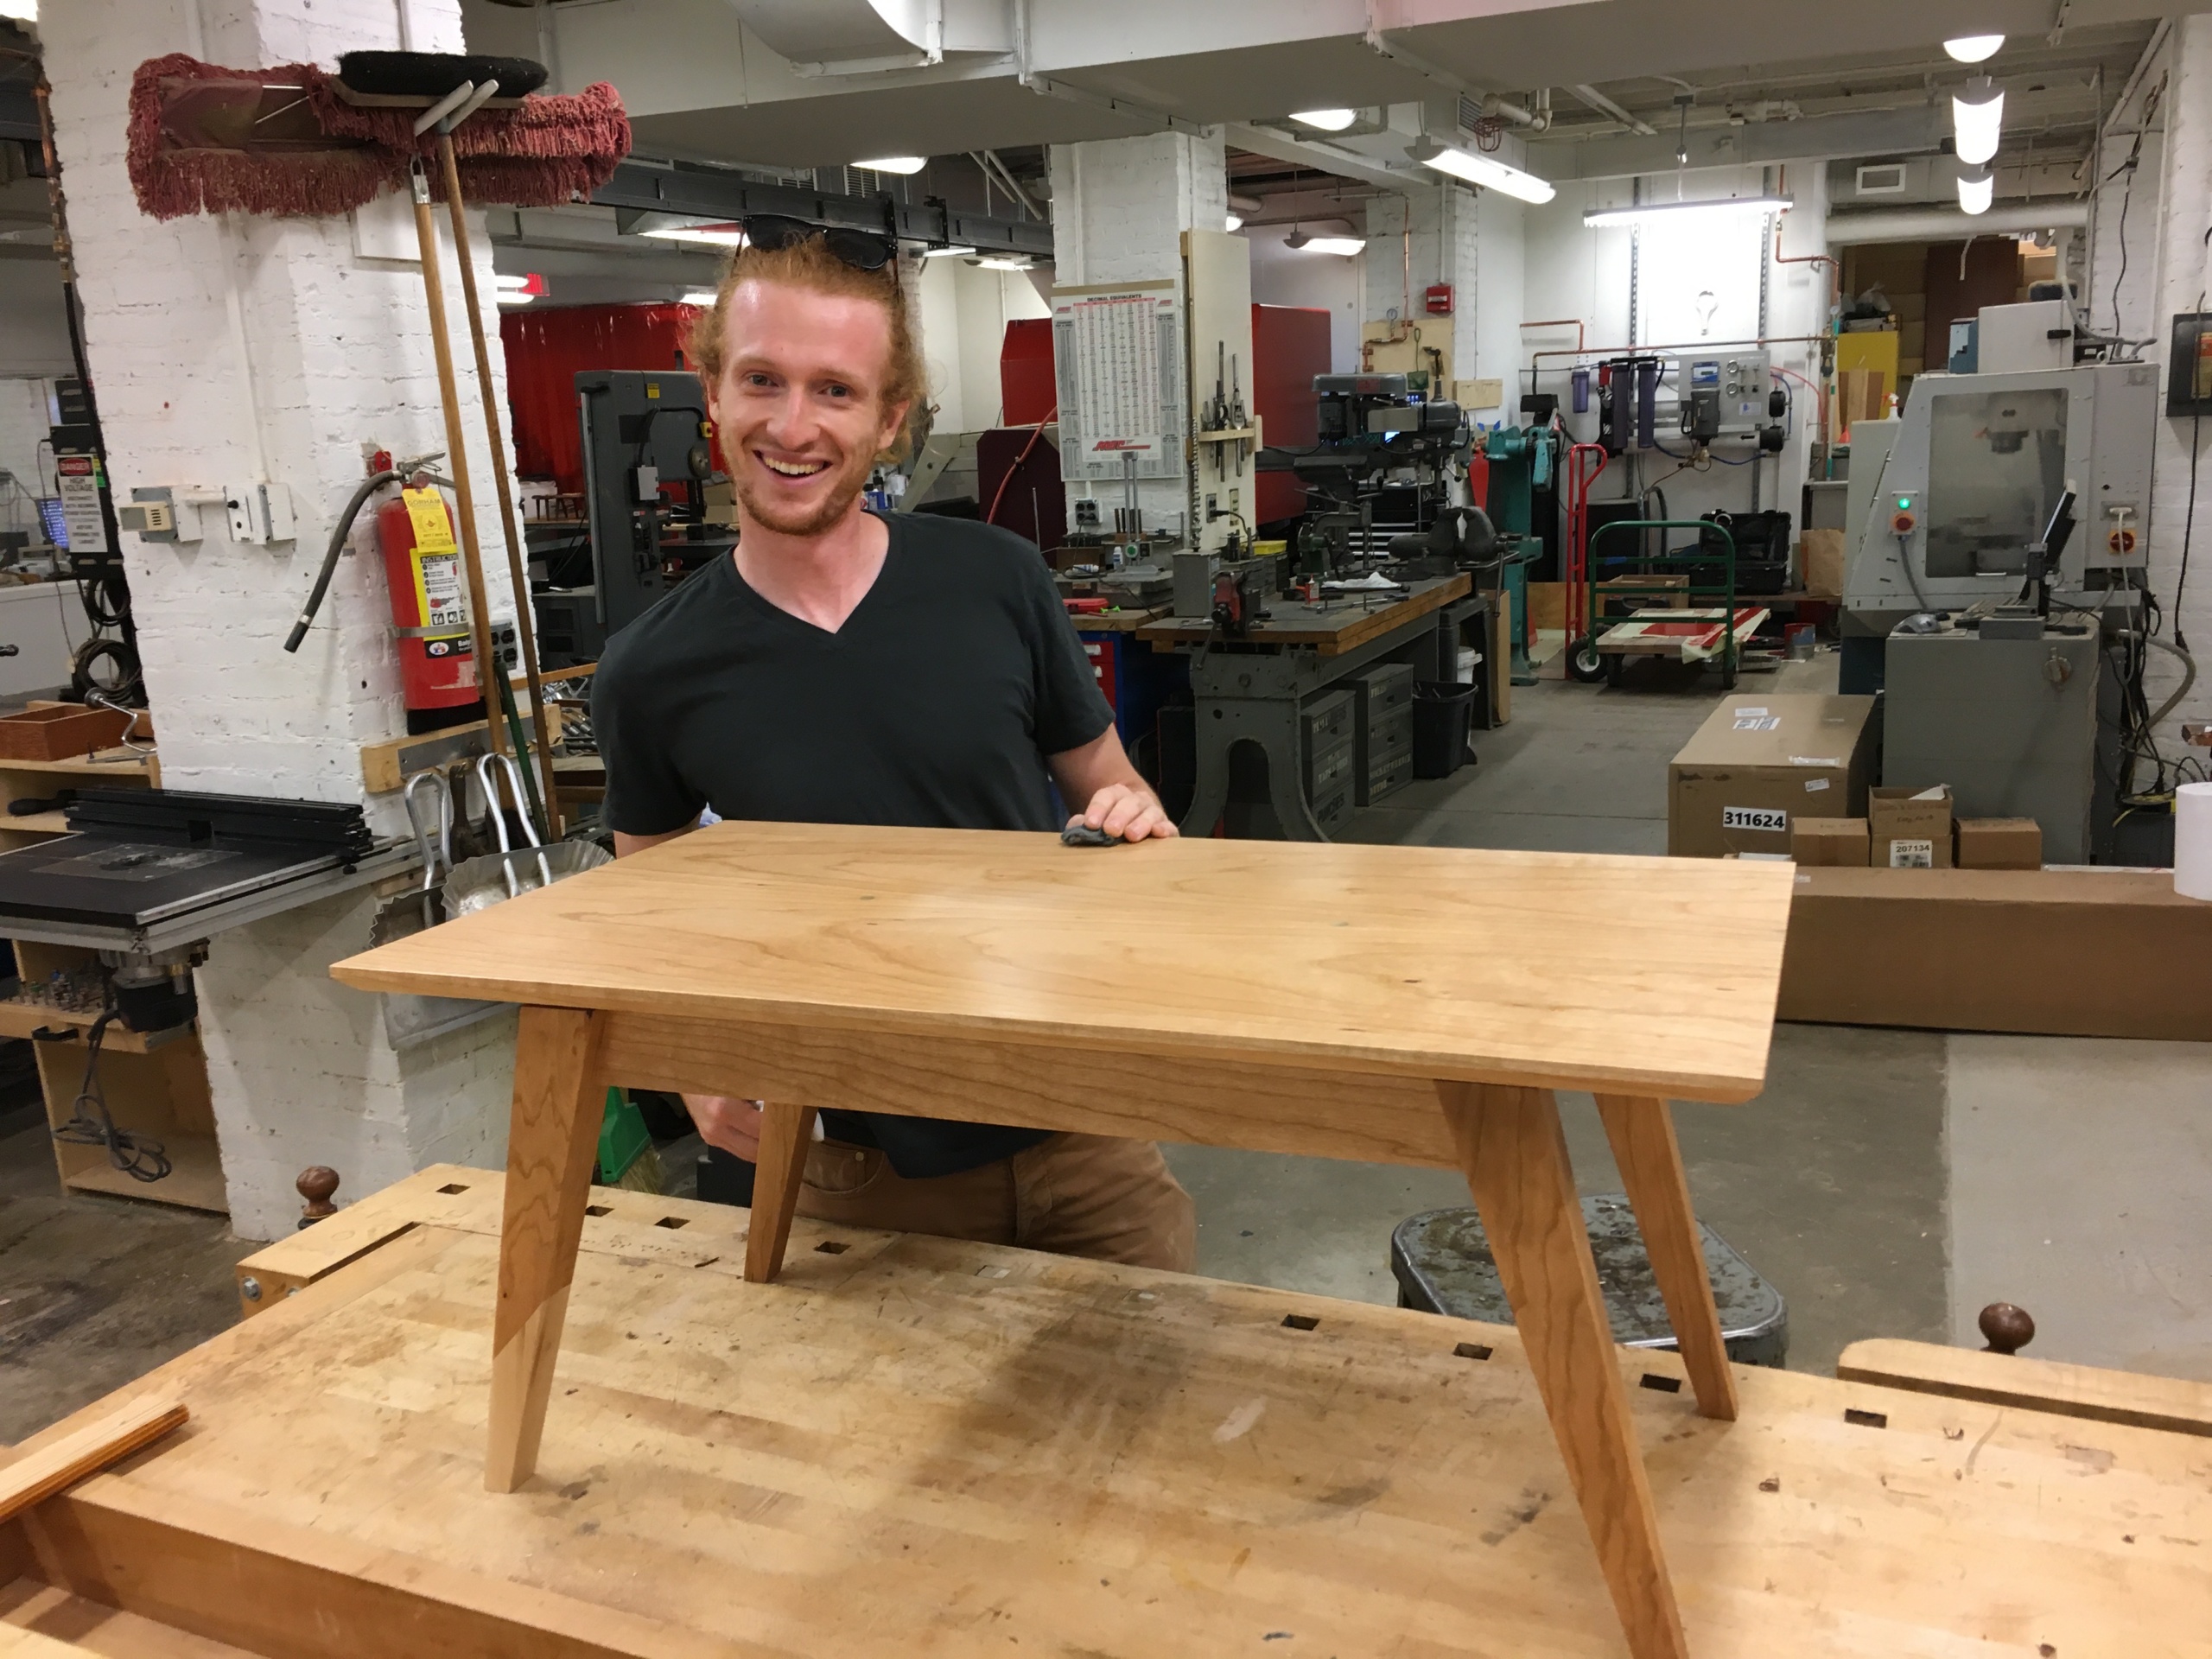 Vadim studied mechanical engineering for his masters degree, and spent much of his free time in the Hobby Shop building furniture.